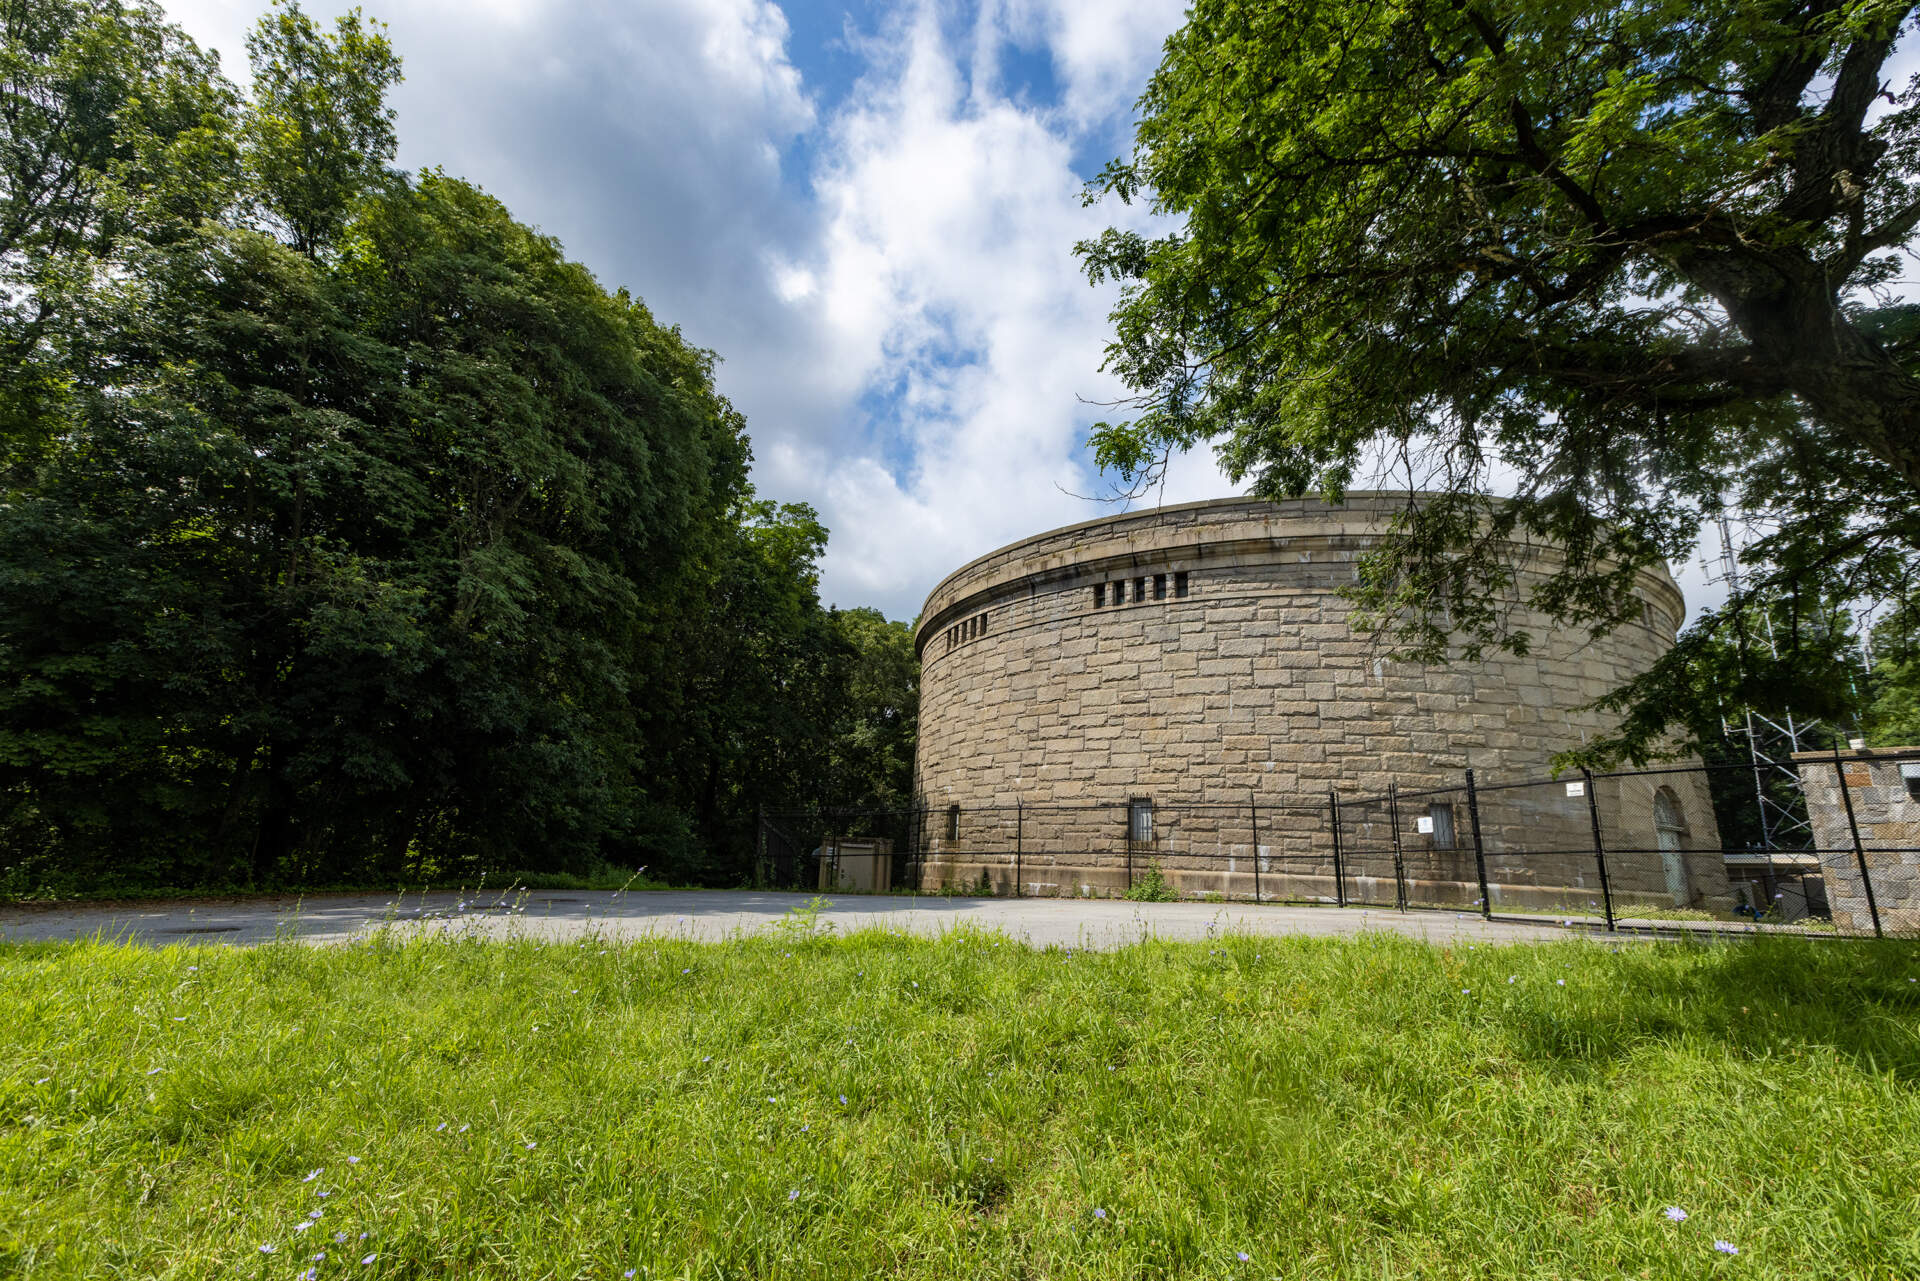 Bellevue Standpipe, a historic water storage tank built in the early 20th century on Bellevue Hill in the Stony Brook Reservation in West Roxbury. It is still in use today as stand-by water storage to a newer one. Trails wind throughout the reservation. (Jesse Costa/WBUR)